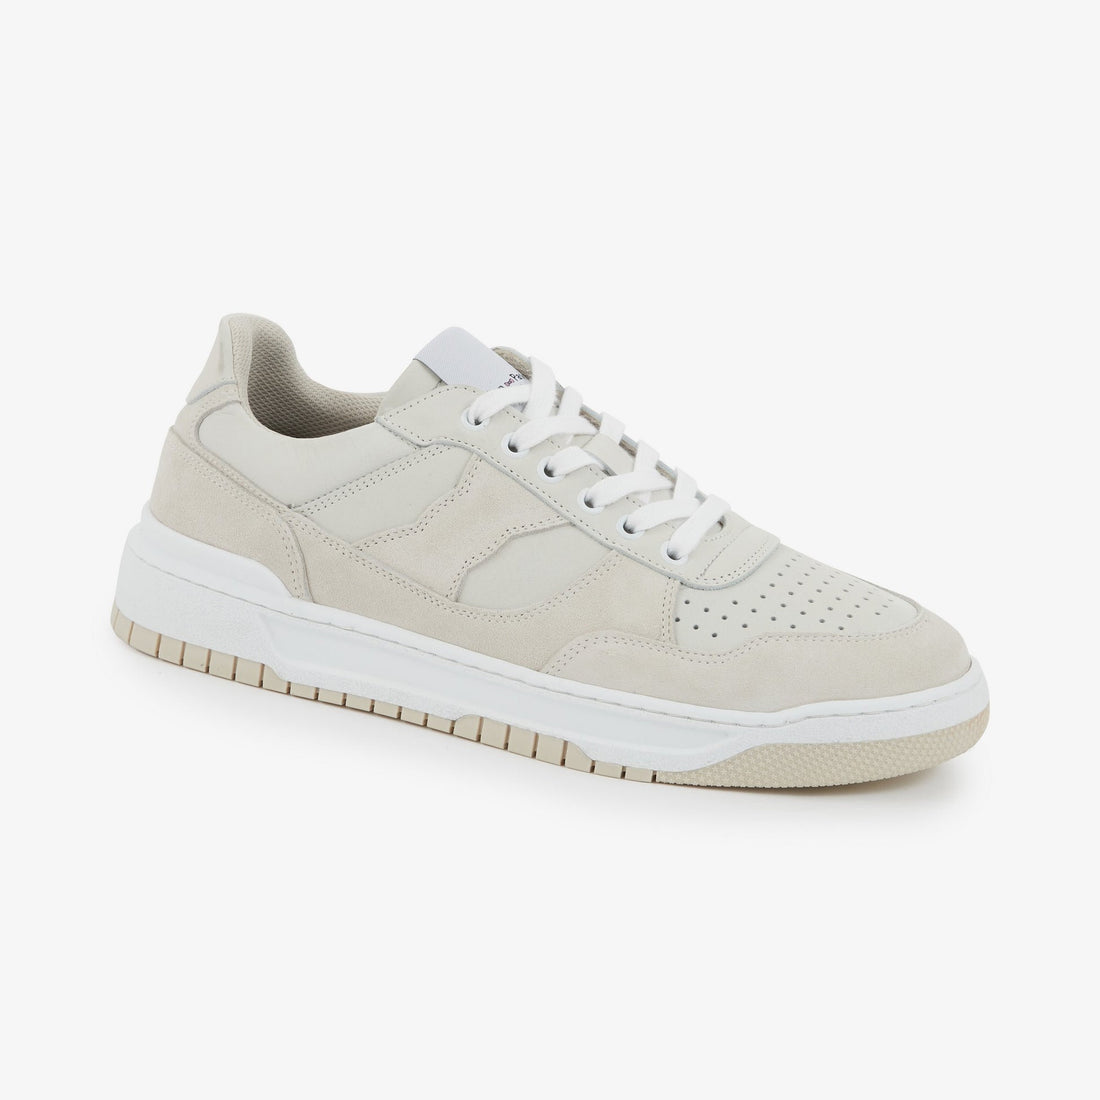 Off-White Two-Tone Leather Trainers_H23CHSTE0004_ECC2_01